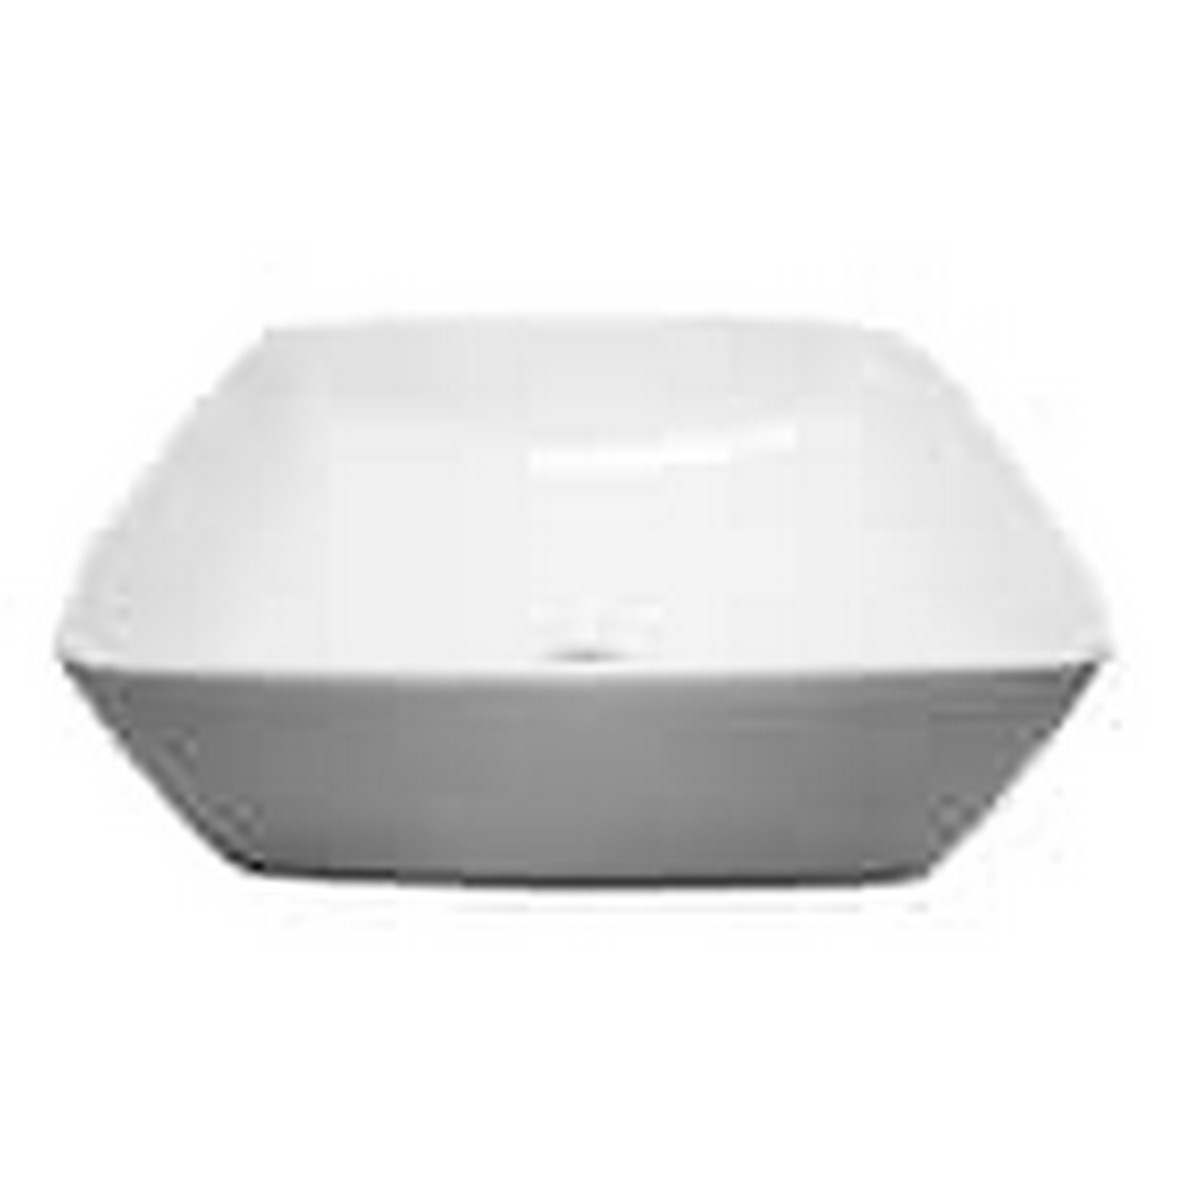 BARCLAY 4-110WH ARCHER 16 1/4 INCH VITREOUS CHINA VESSEL BATHROOM SINK